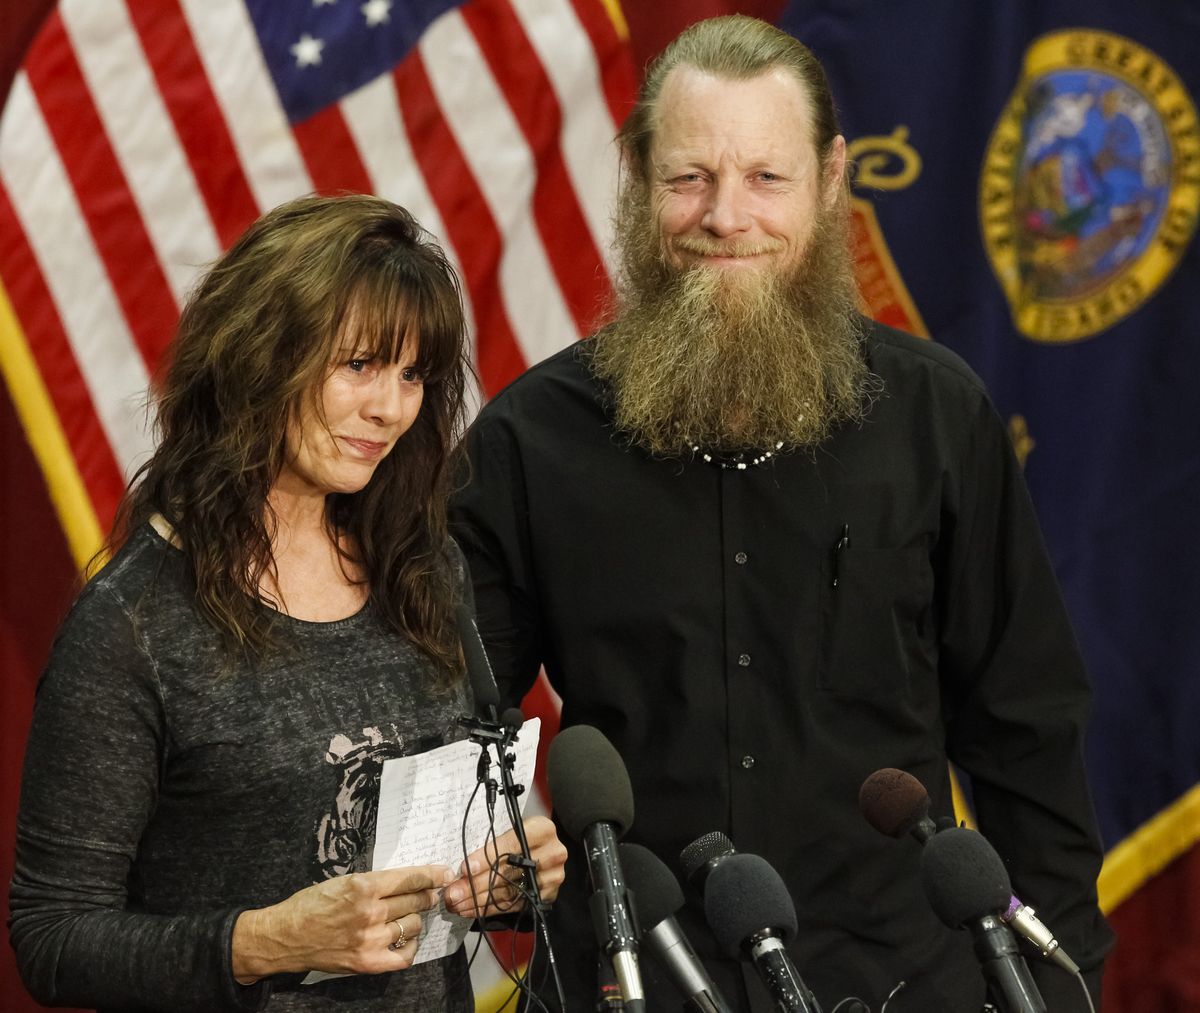 Jani and Bob Bergdahl speak to the media during a news conference at Gowen Field in Boise on Sunday. Their son, Sgt. Bowe Bergdahl, is back in American hands, freed for five Guantanamo terrorism detainees. (Associated Press)